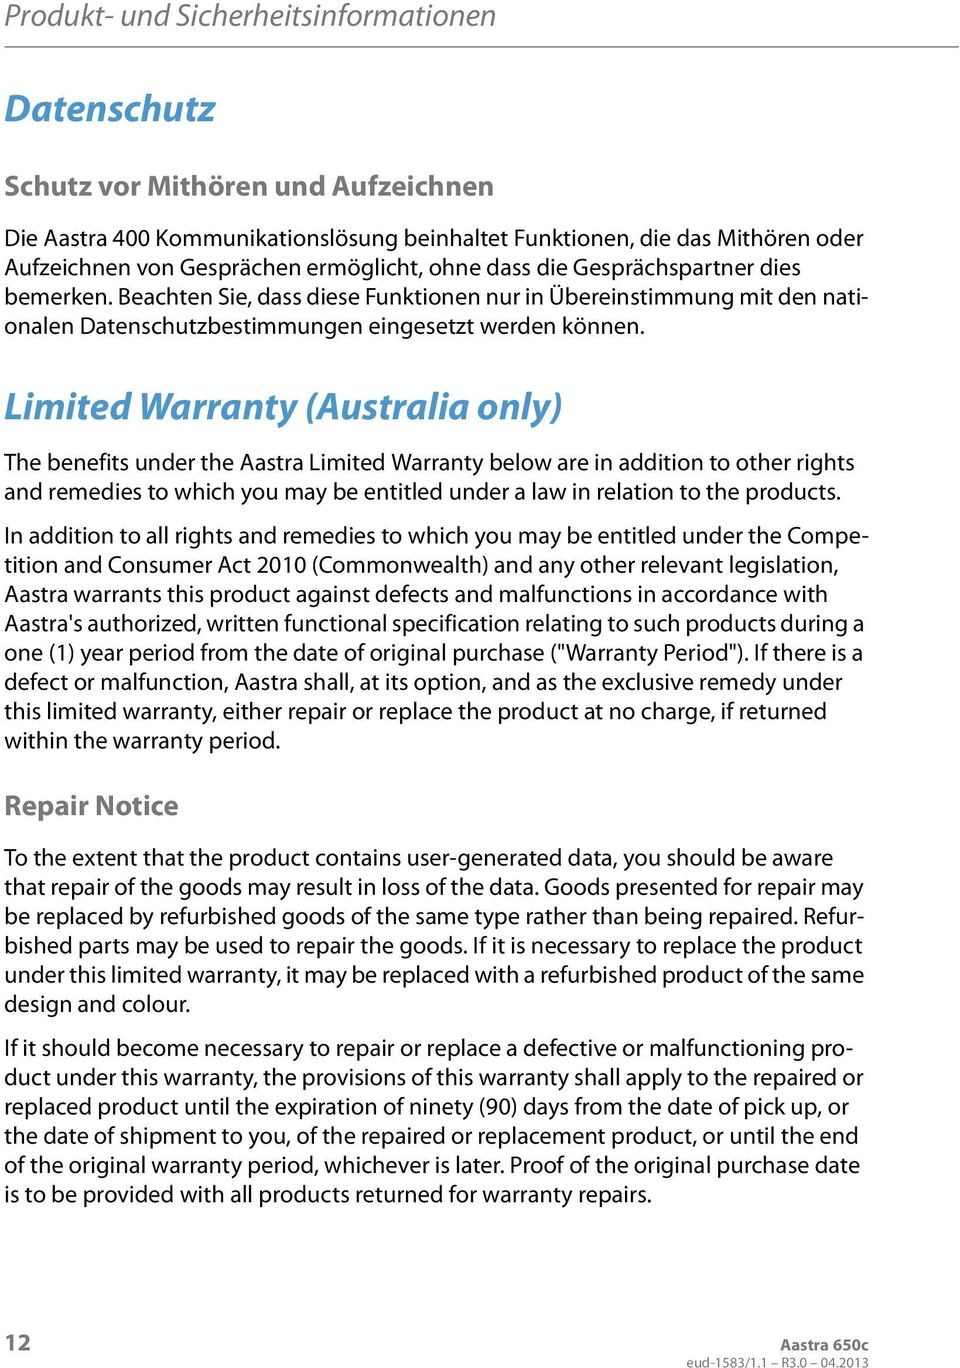 Limited Warranty (Australia only) The benefits under the Aastra Limited Warranty below are in addition to other rights and remedies to which you may be entitled under a law in relation to the